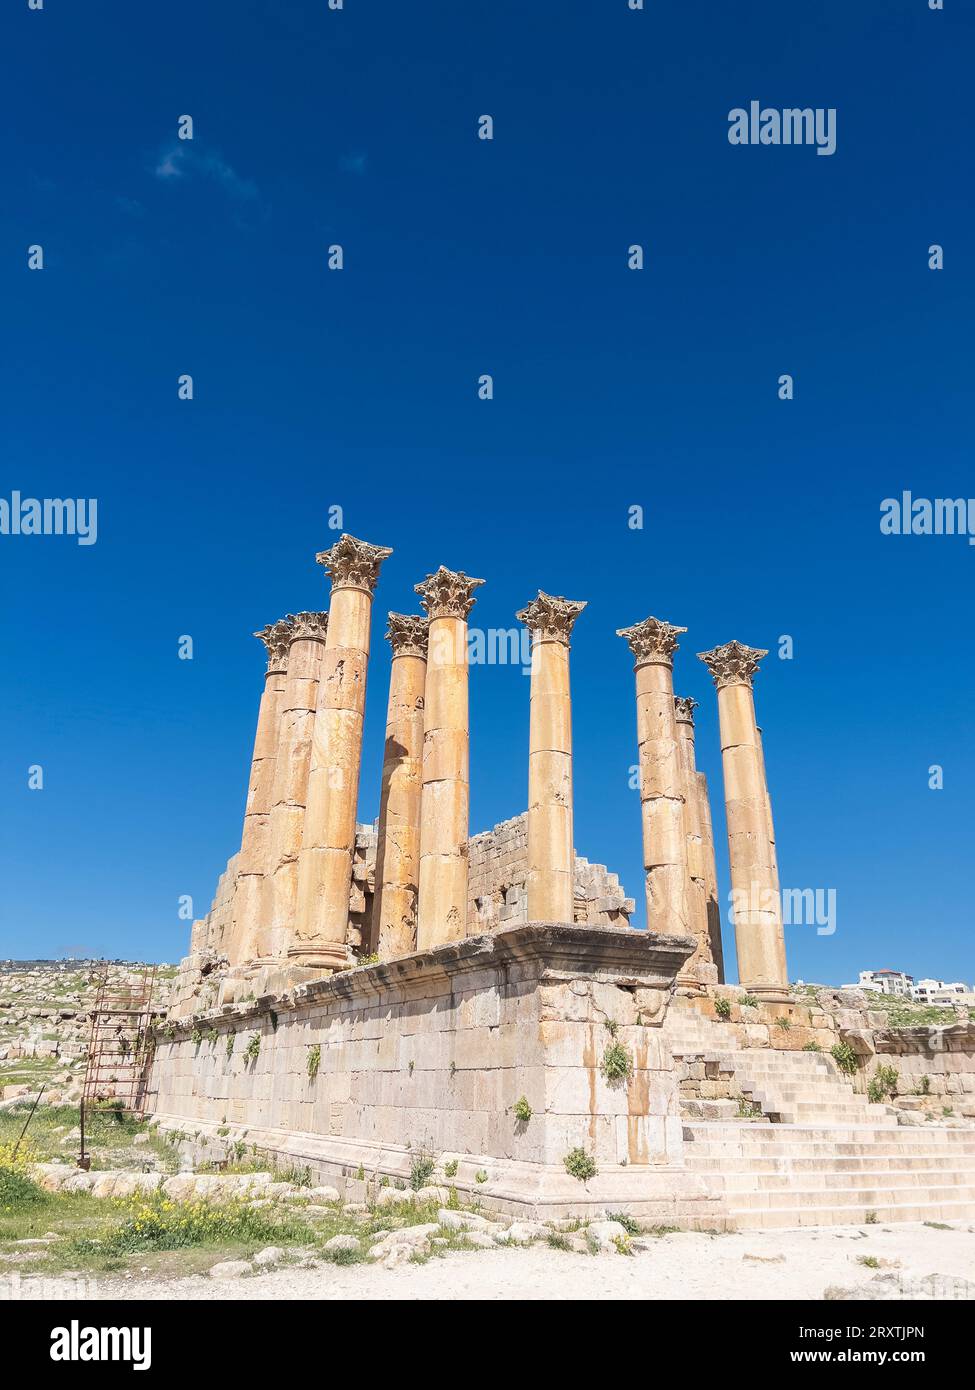 Columns frame a building in the ancient city of Jerash, believed to be founded in 331 BC by Alexander the Great, Jerash, Jordan, Middle East Stock Photo